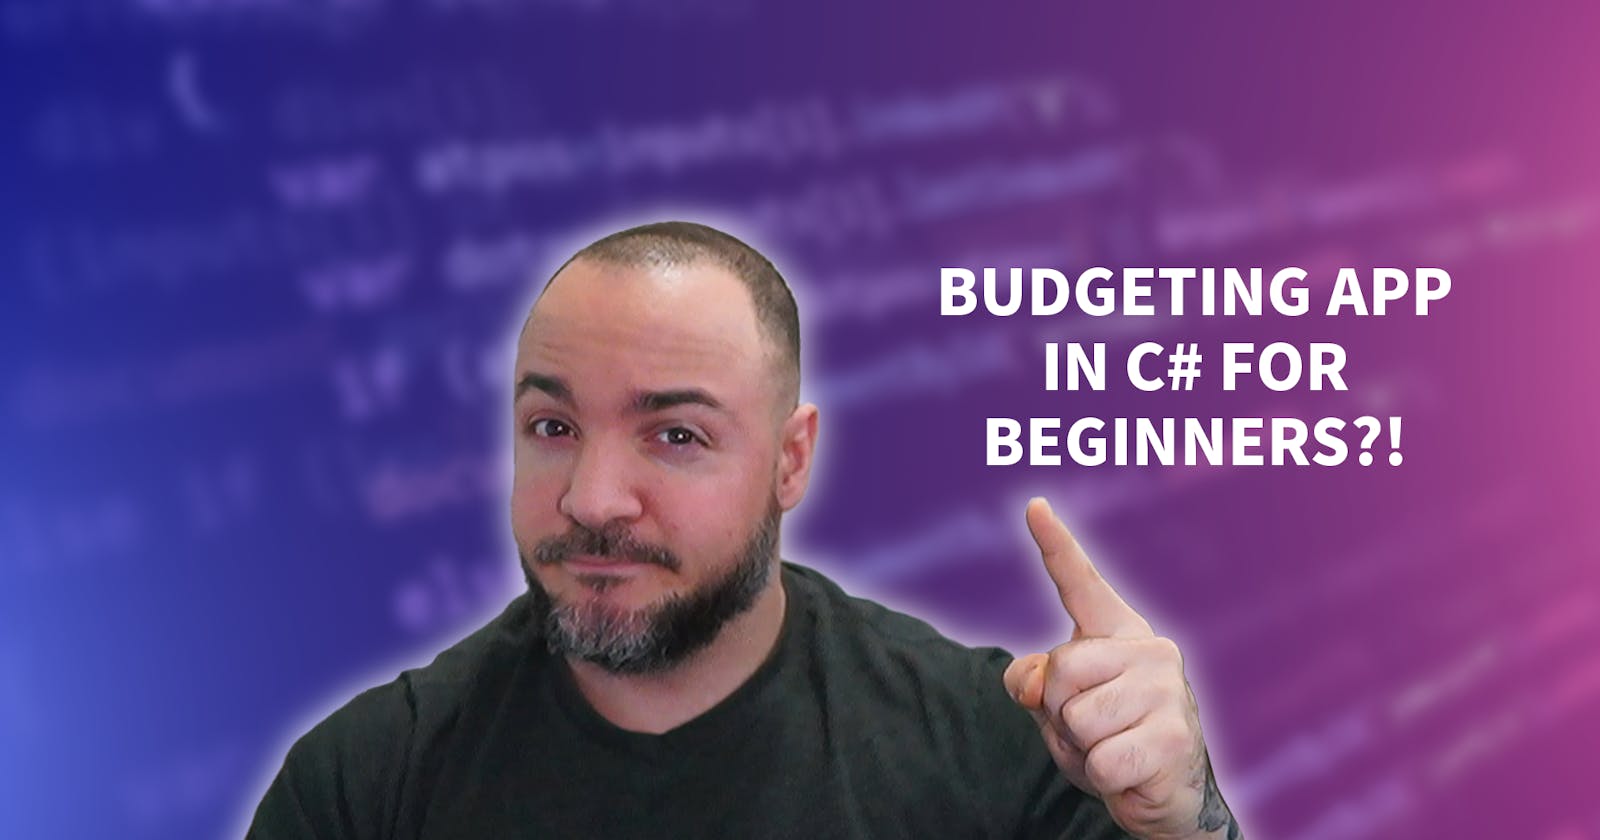 How To Make A Budgeting App In C# With Blazor